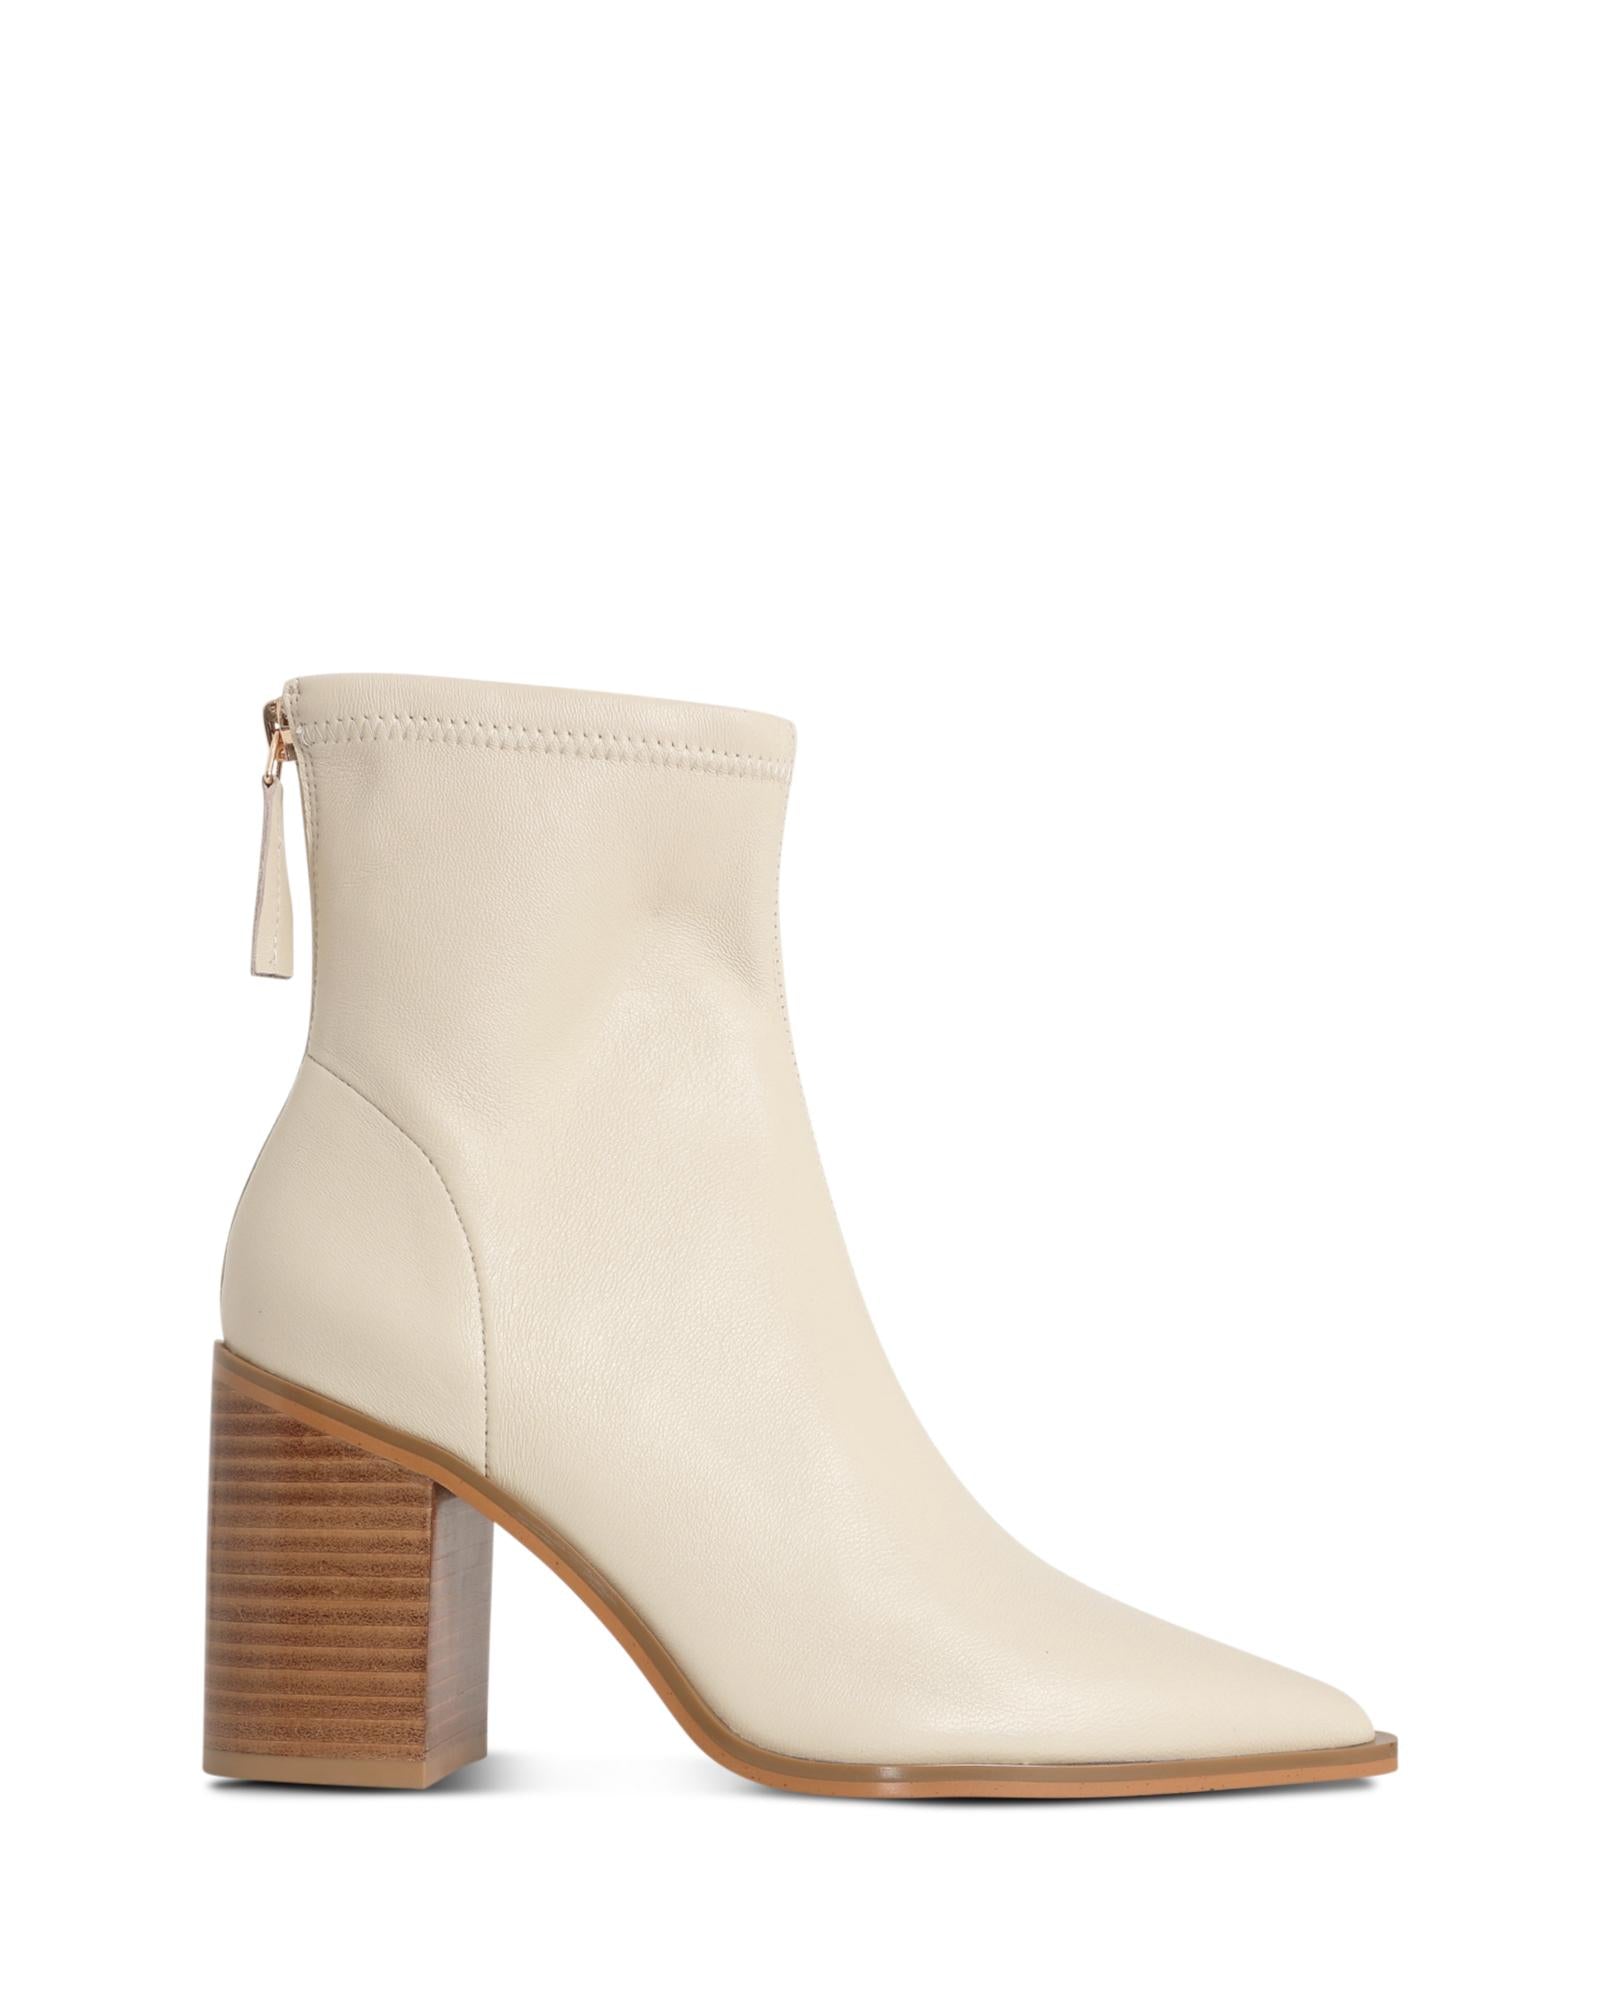 Saylor Oat 9cm Block Heel Ankle Boot with Point Toe